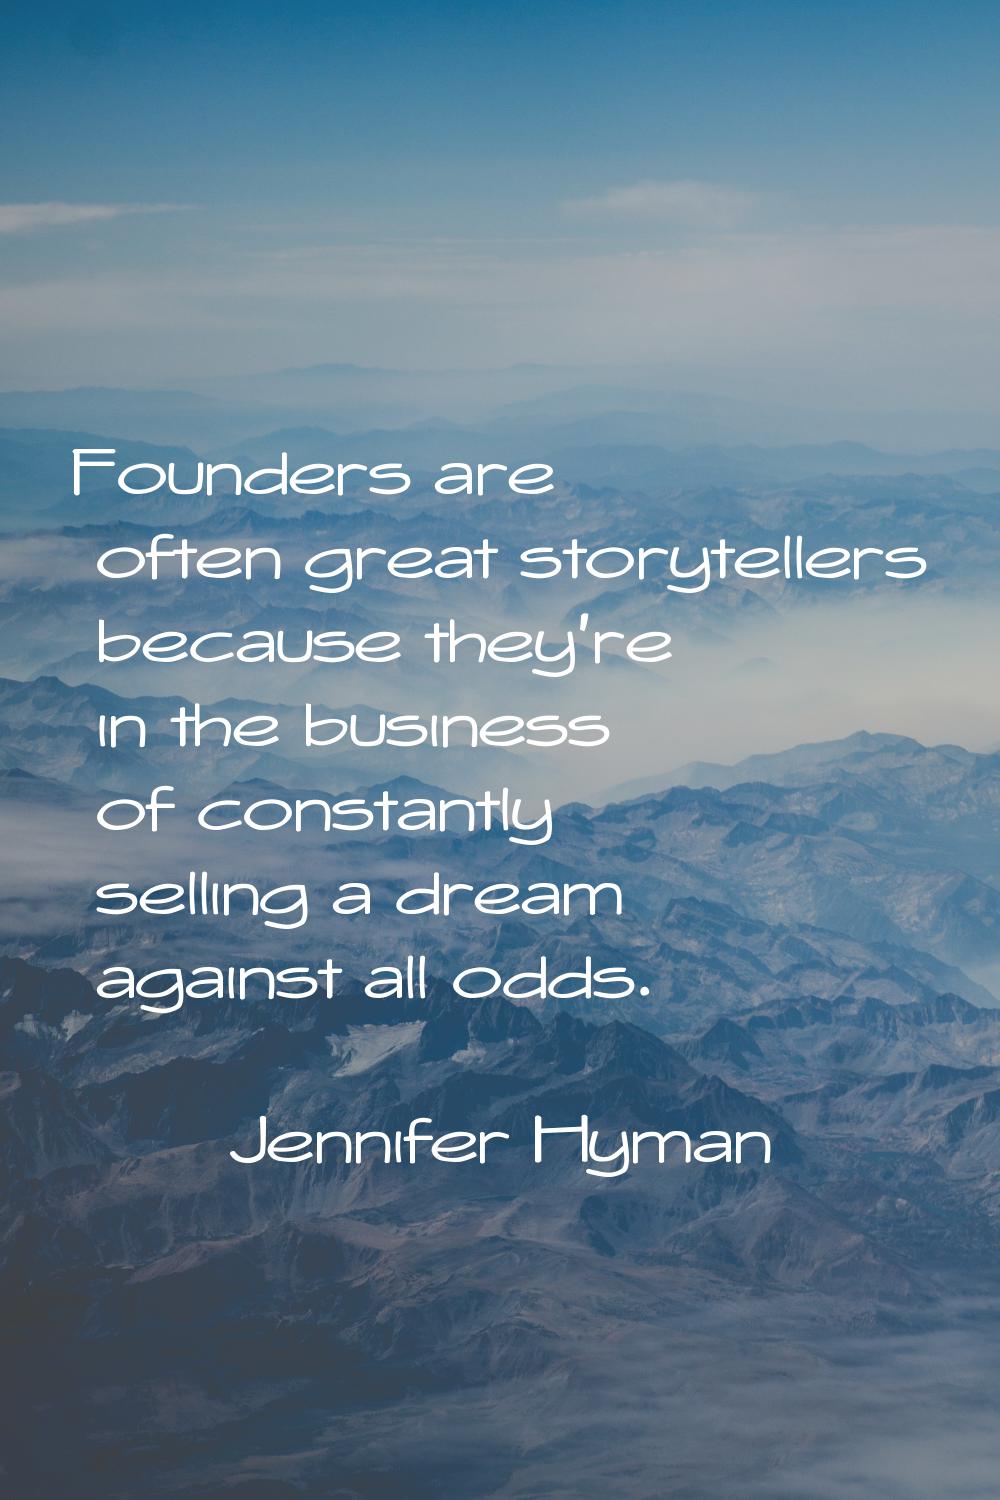 Founders are often great storytellers because they're in the business of constantly selling a dream